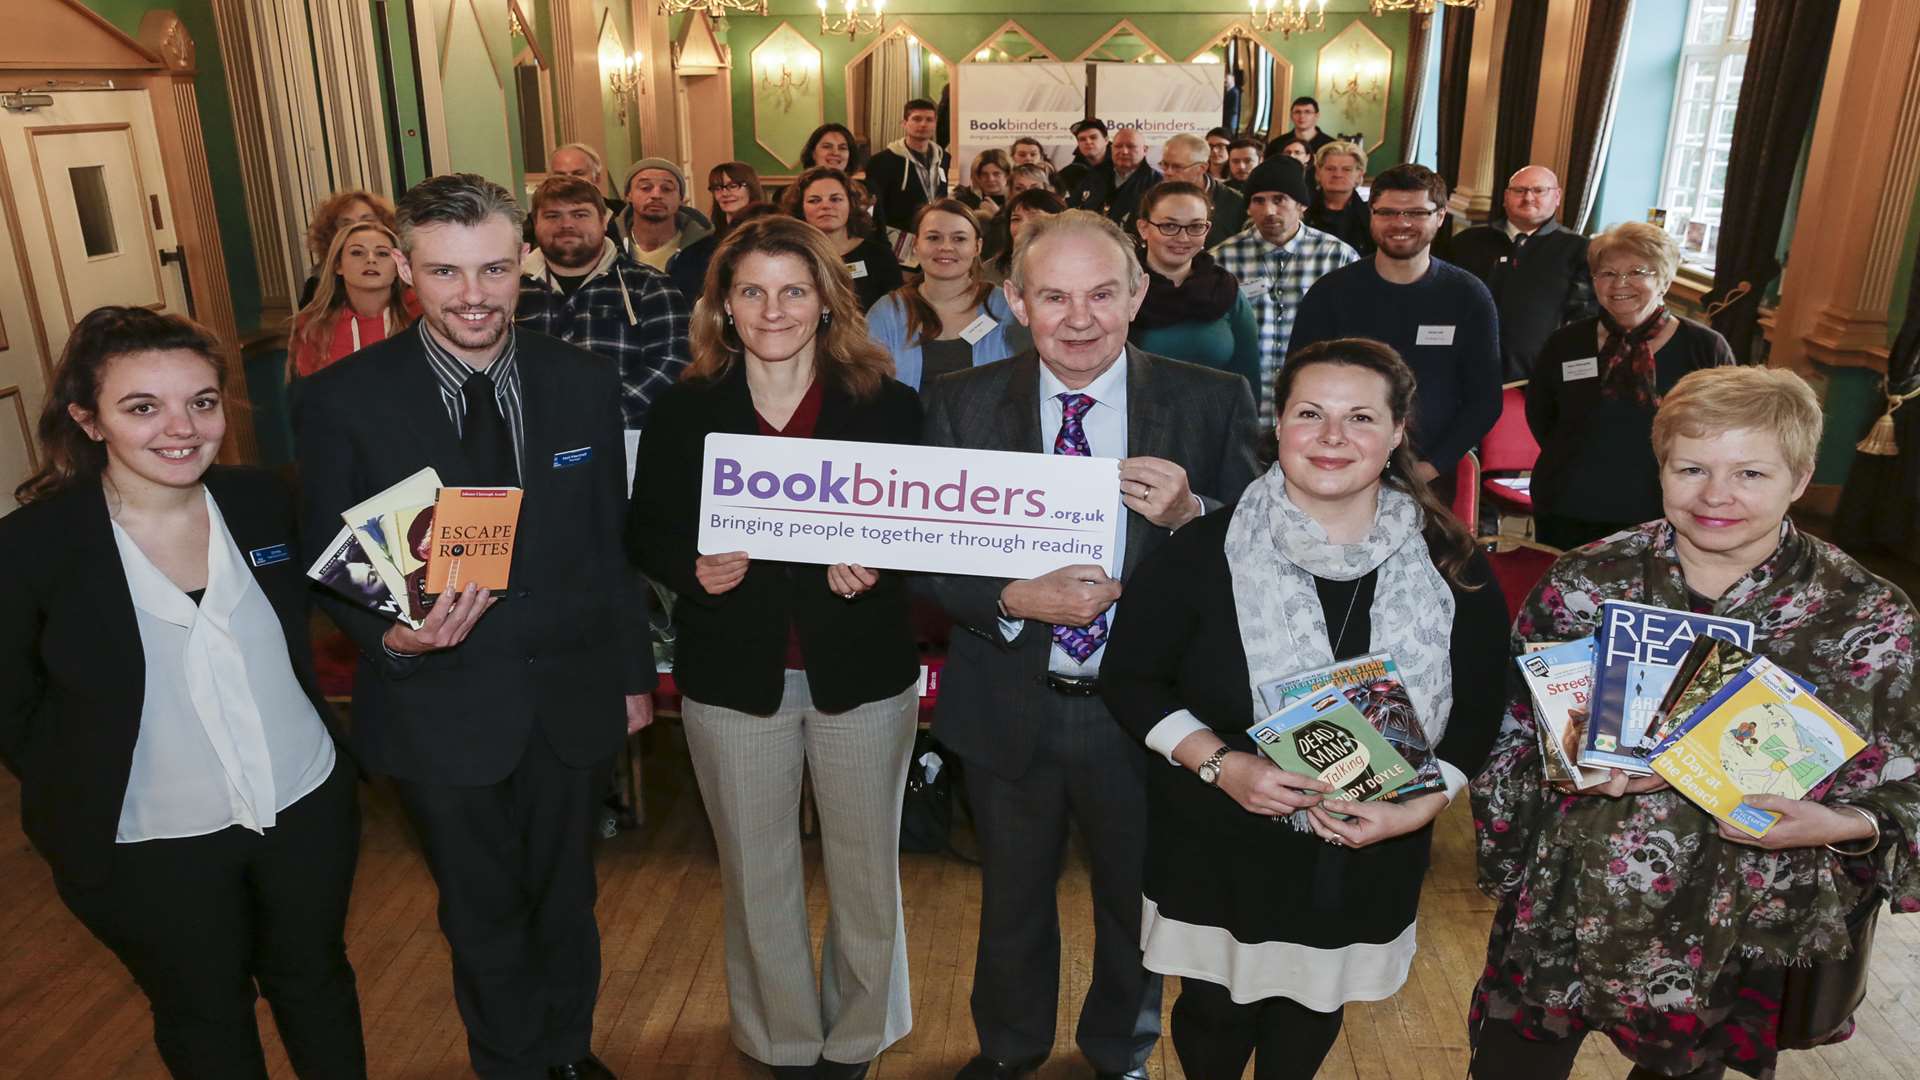 Bookbinders literacy scheme for vulnerable groups launched this week